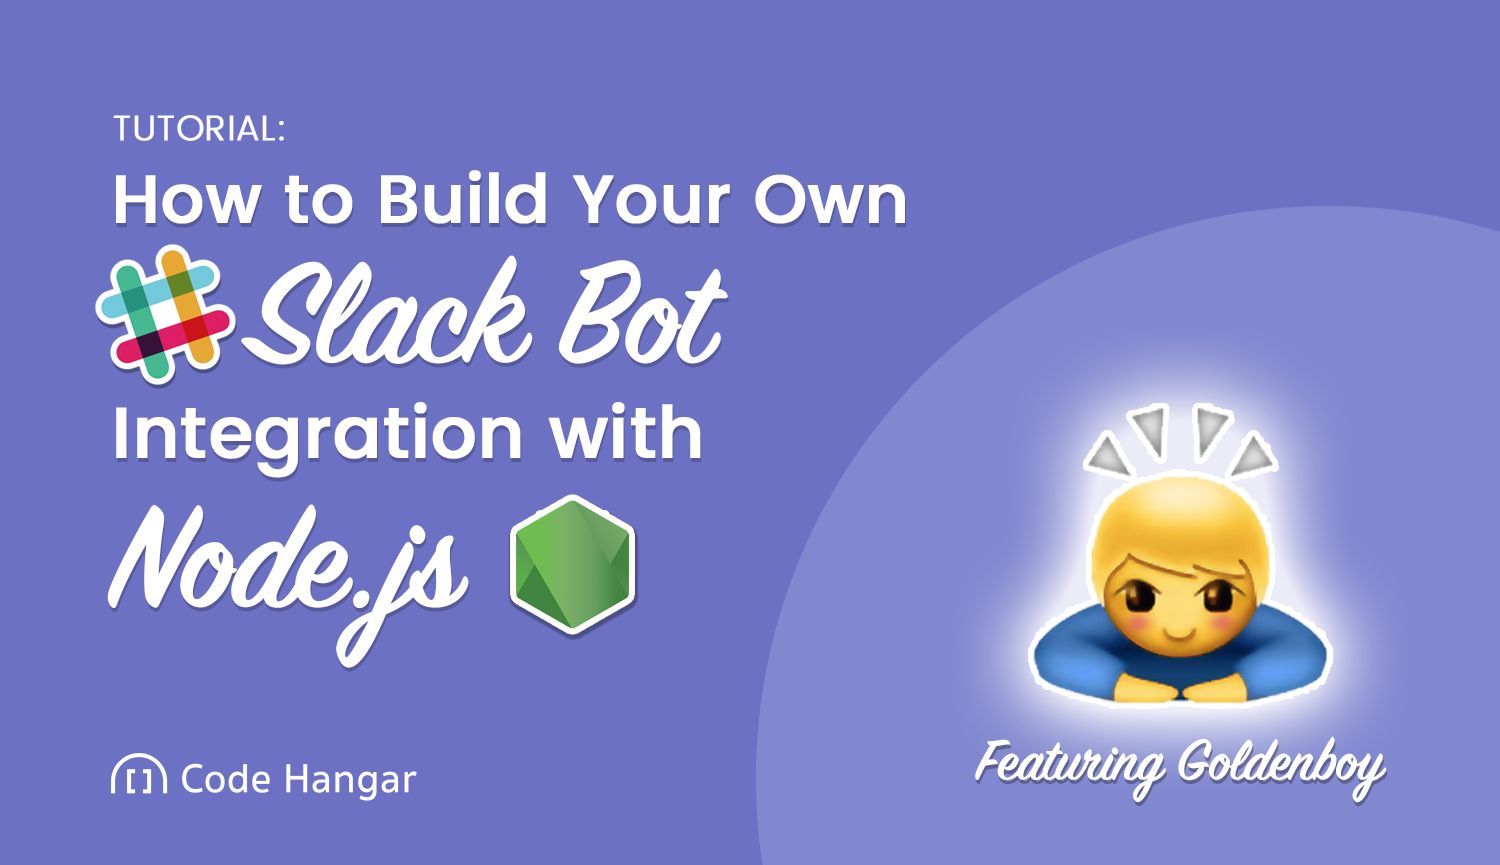 How to Build Your Own Slack Bot Integration with Node.js